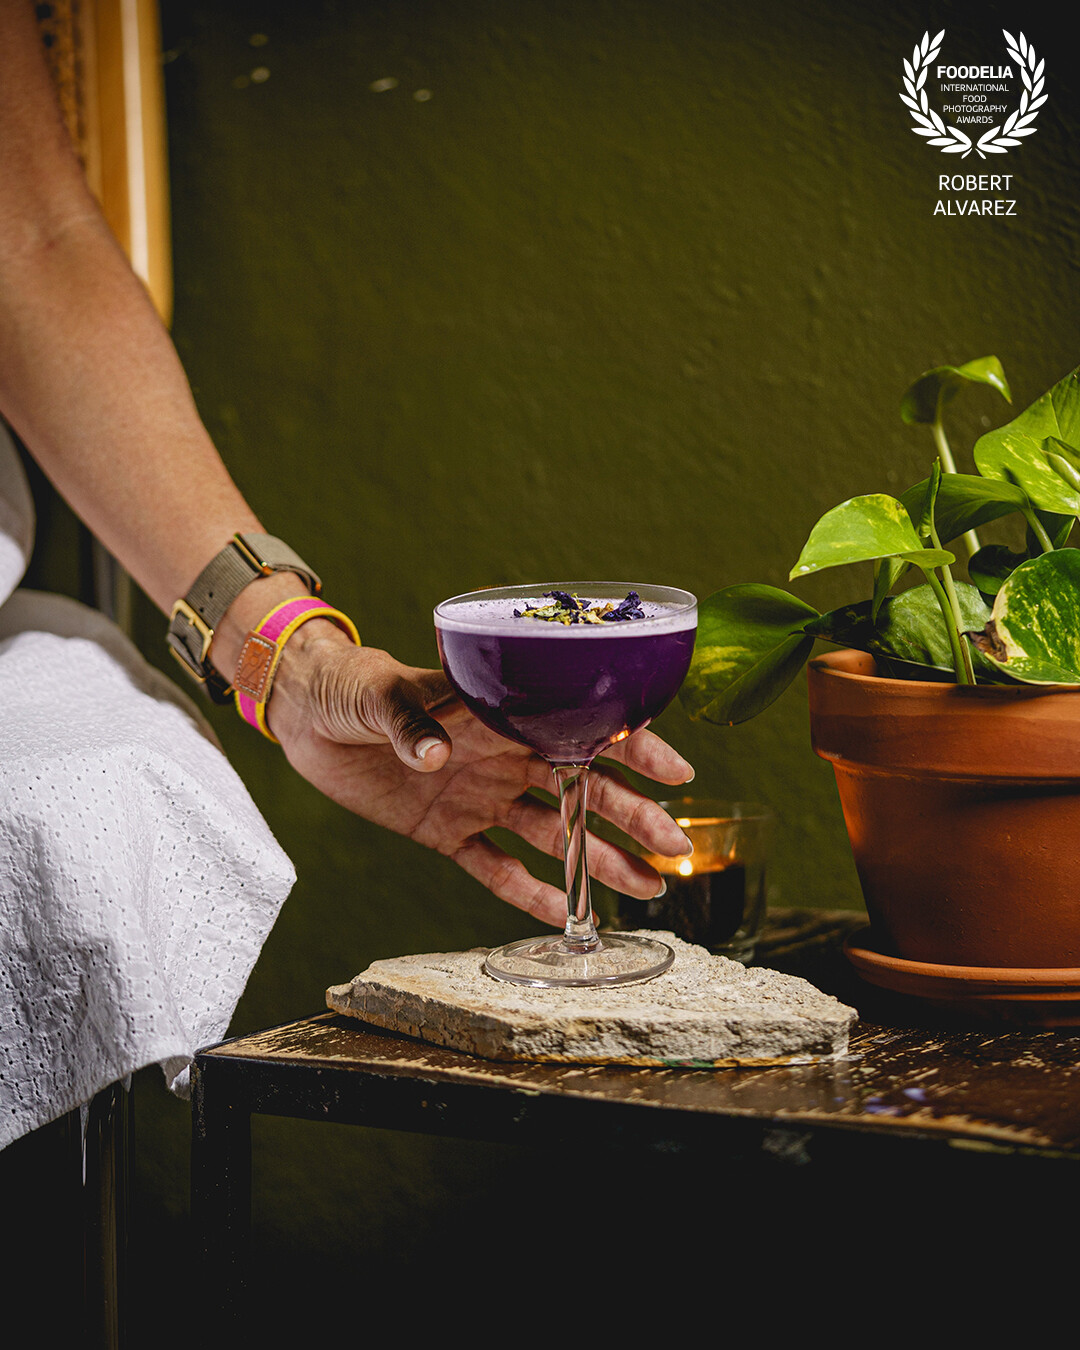 The first cocktail of the night.  This was a fun dark and moody shoot for Bar 0.2 in Santurce, Puerto Rico.